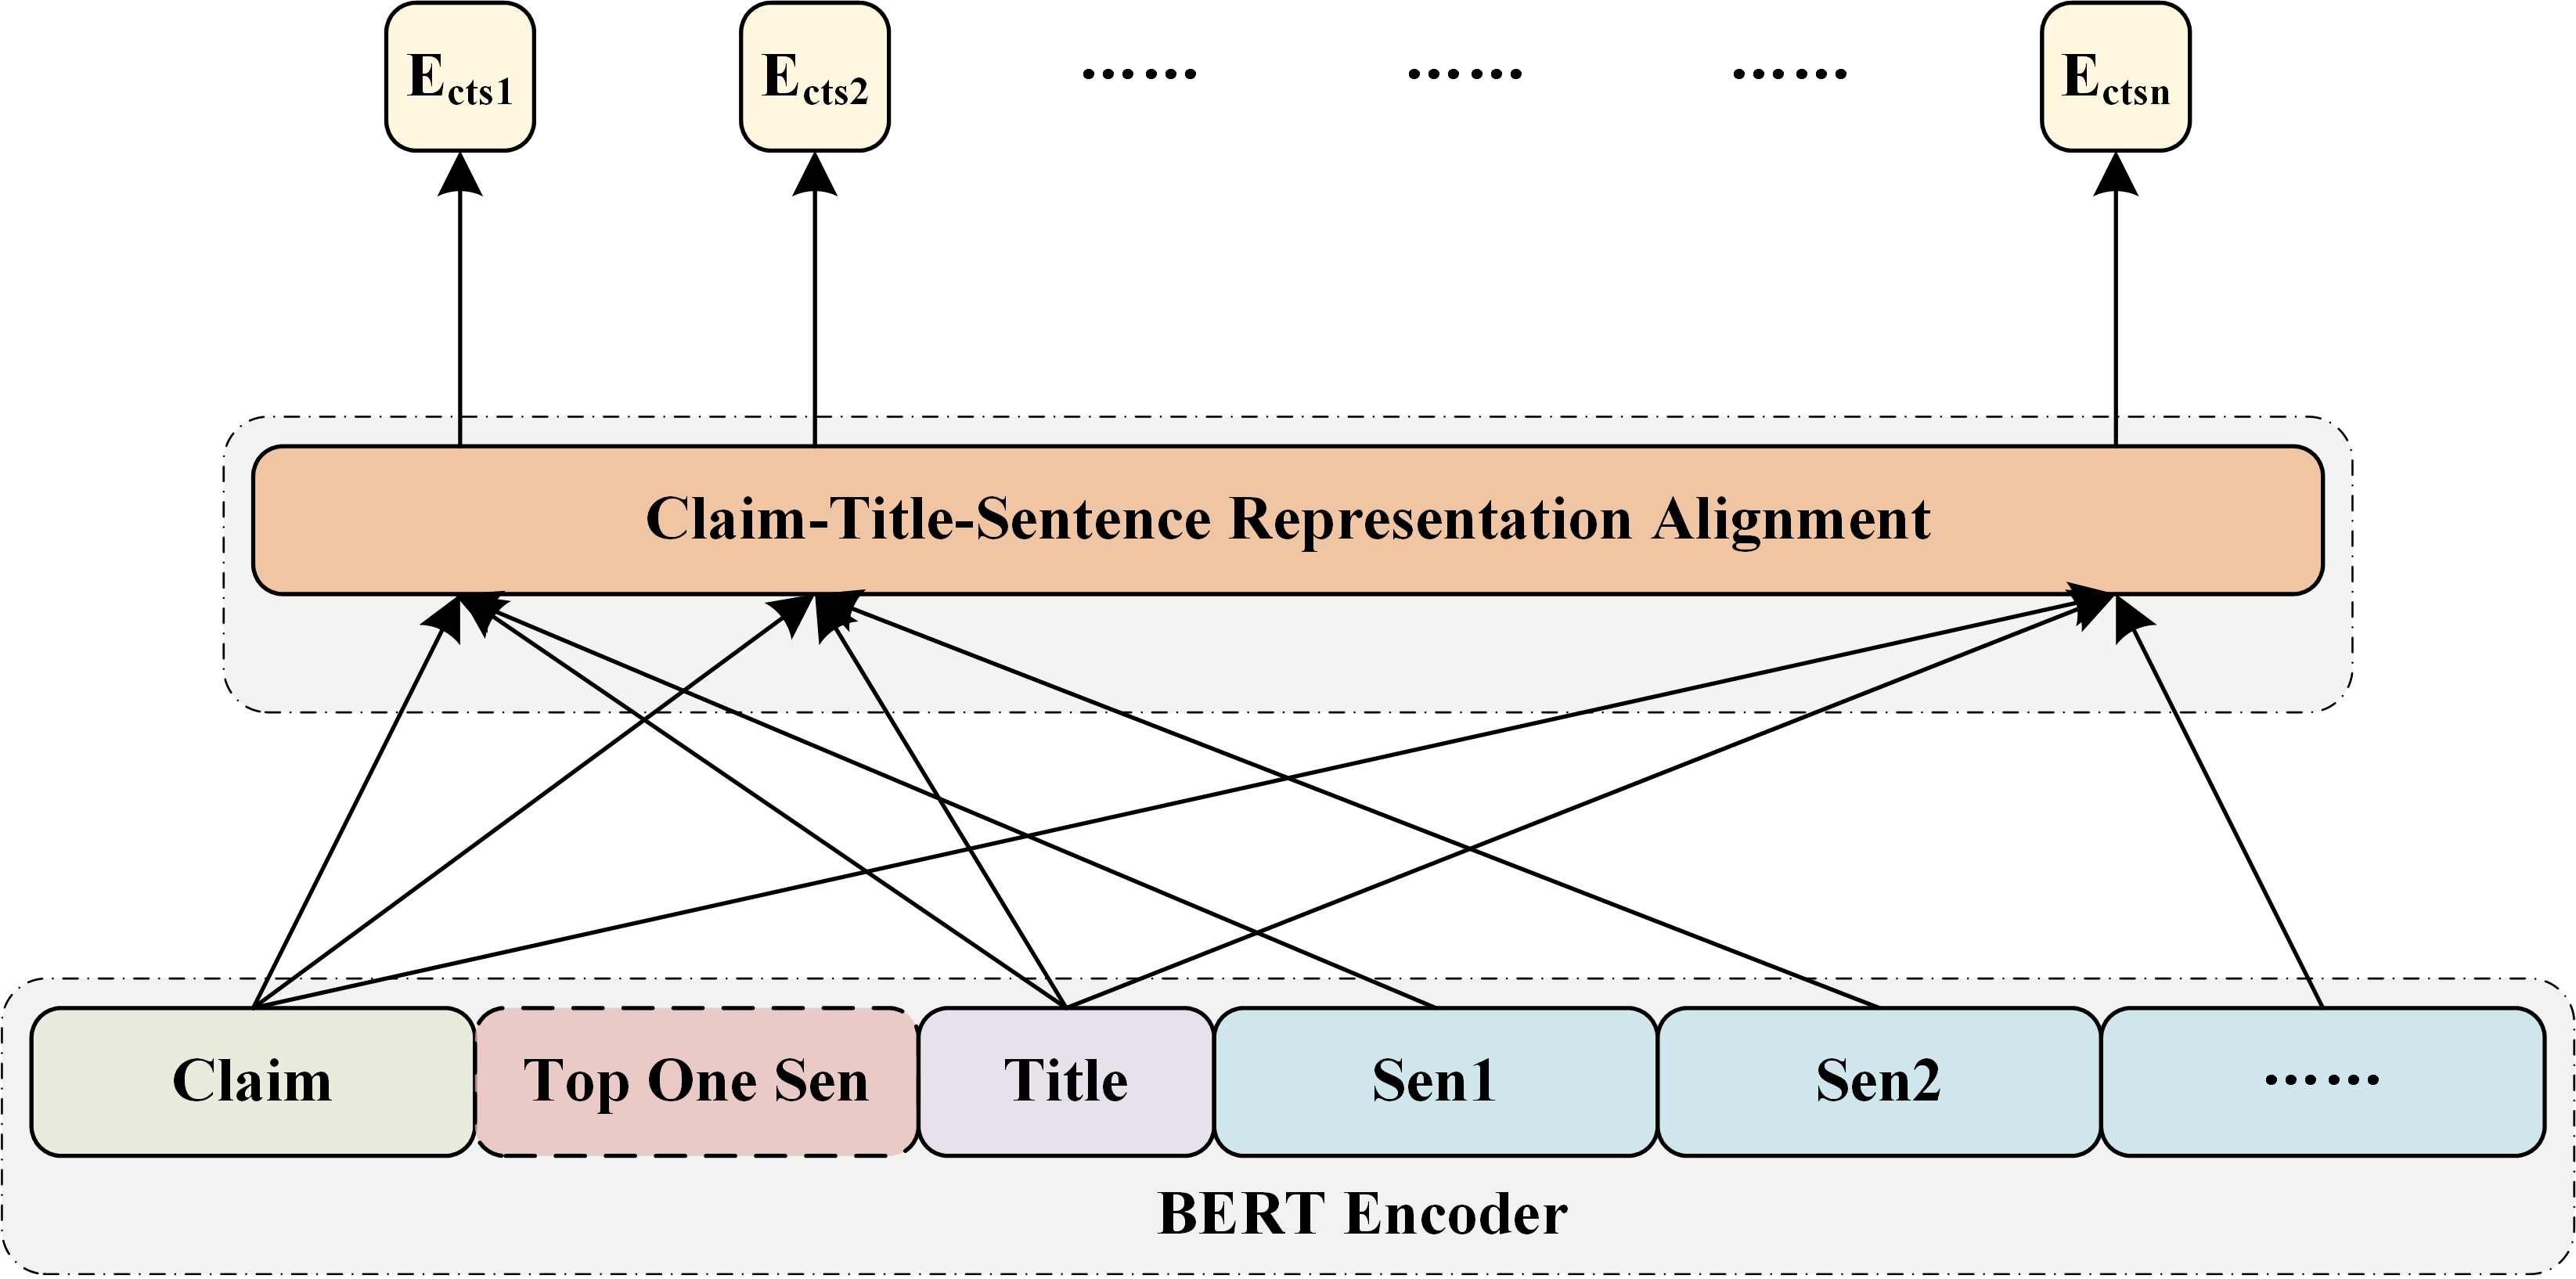 Sentence retrieval model. Sentences are encoded within intra-document context. In iteration 2, we insert top one candidate evidence (red dashed box) into the input sequence as inter-document context.